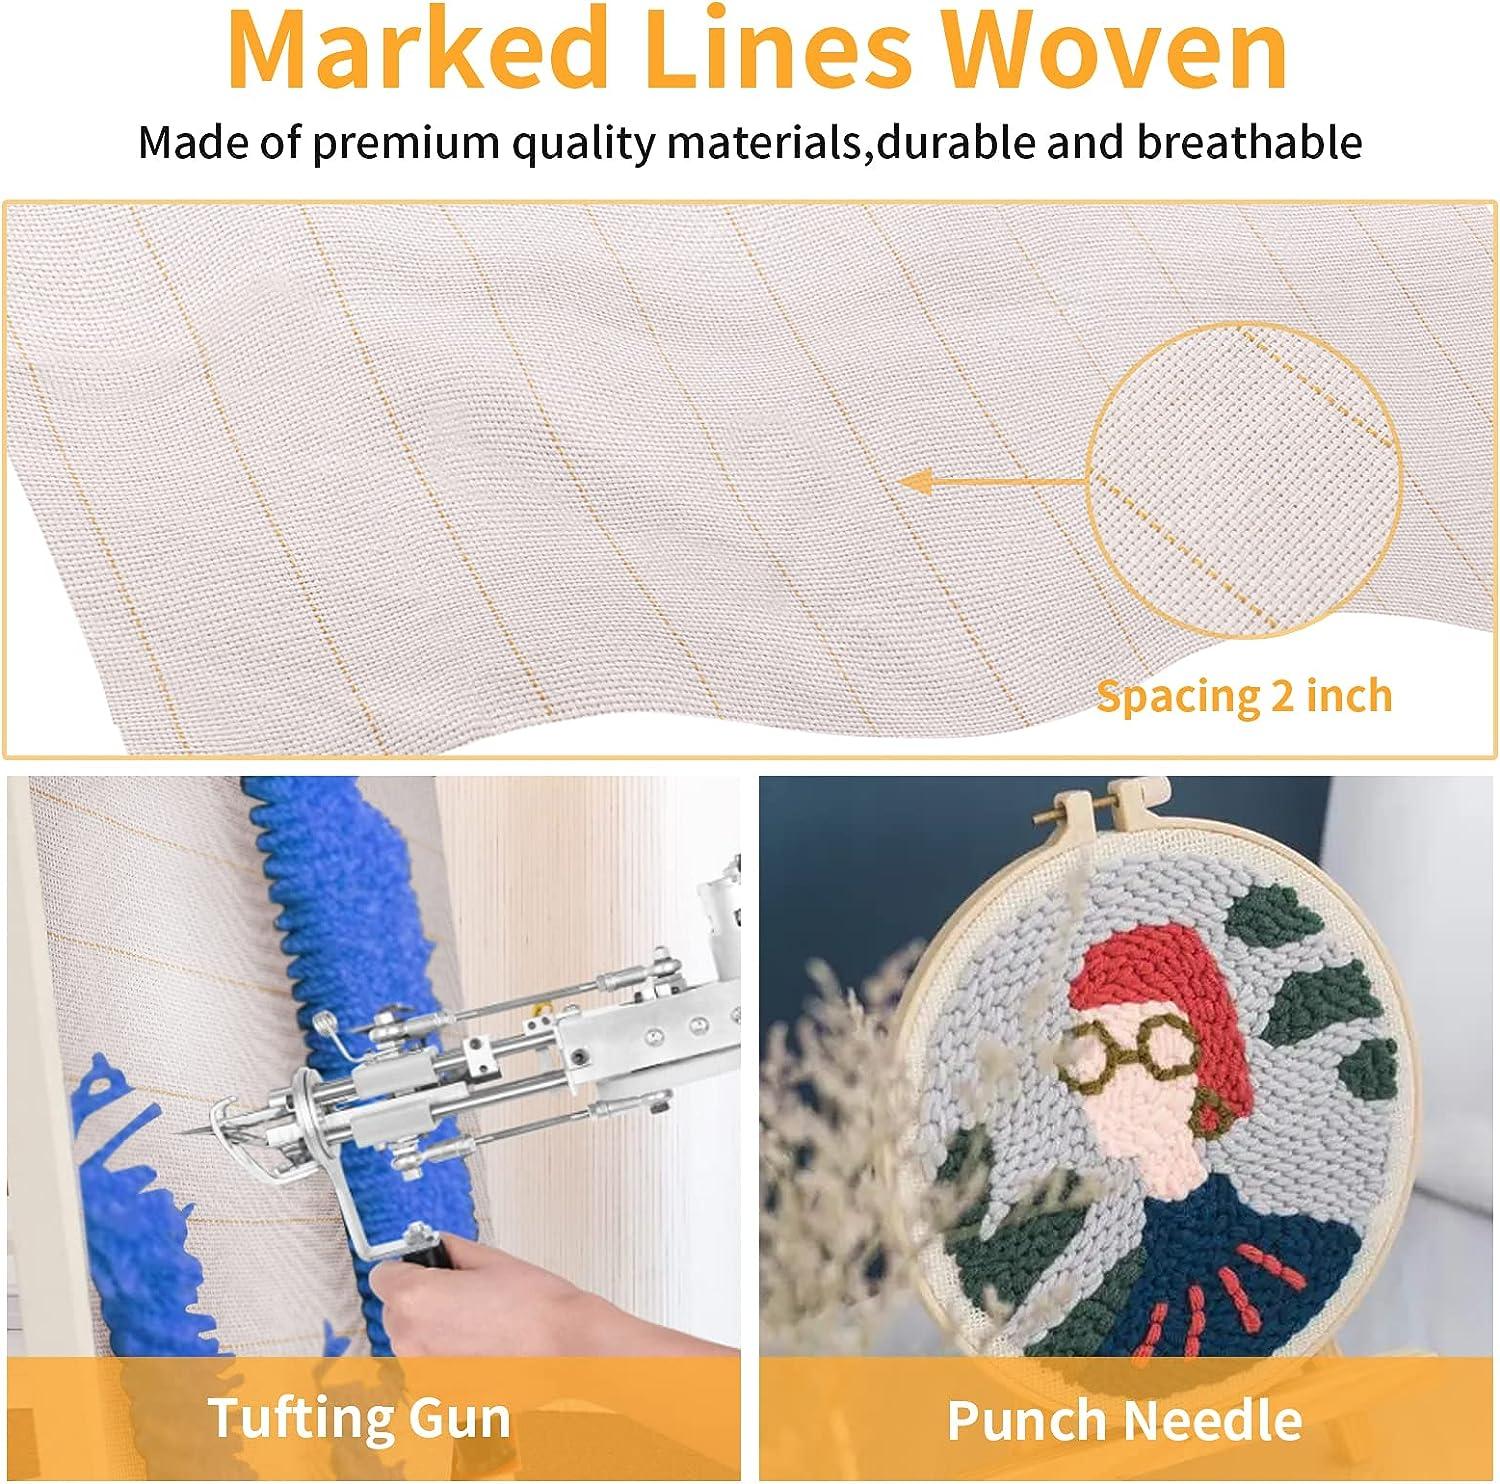  Monks Cloth for Punch Needle, Primary Tufting Cloth Punch  Needle Fabric - Monk Cloth for Embroidery & Carpets - Beginners Handmade  Fabric with Marked Lines - Tufting Pistols Compatible : Everything Else